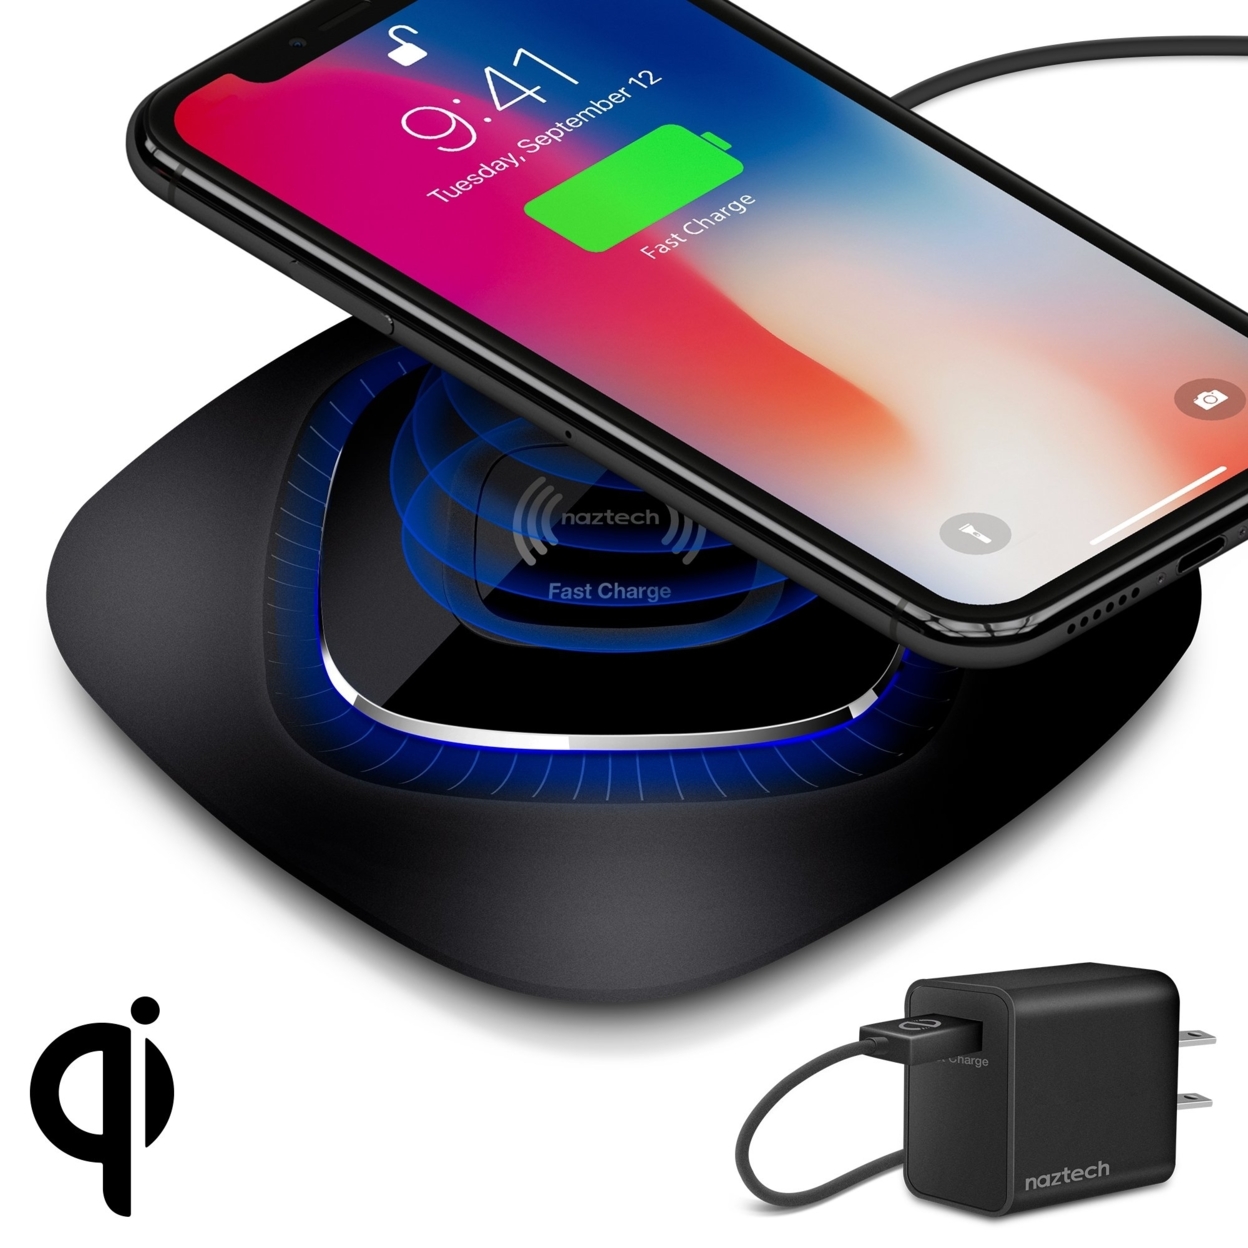 Naztech Power Pad Qi Wireless Fast Charger (POWER-PRNT) - Black